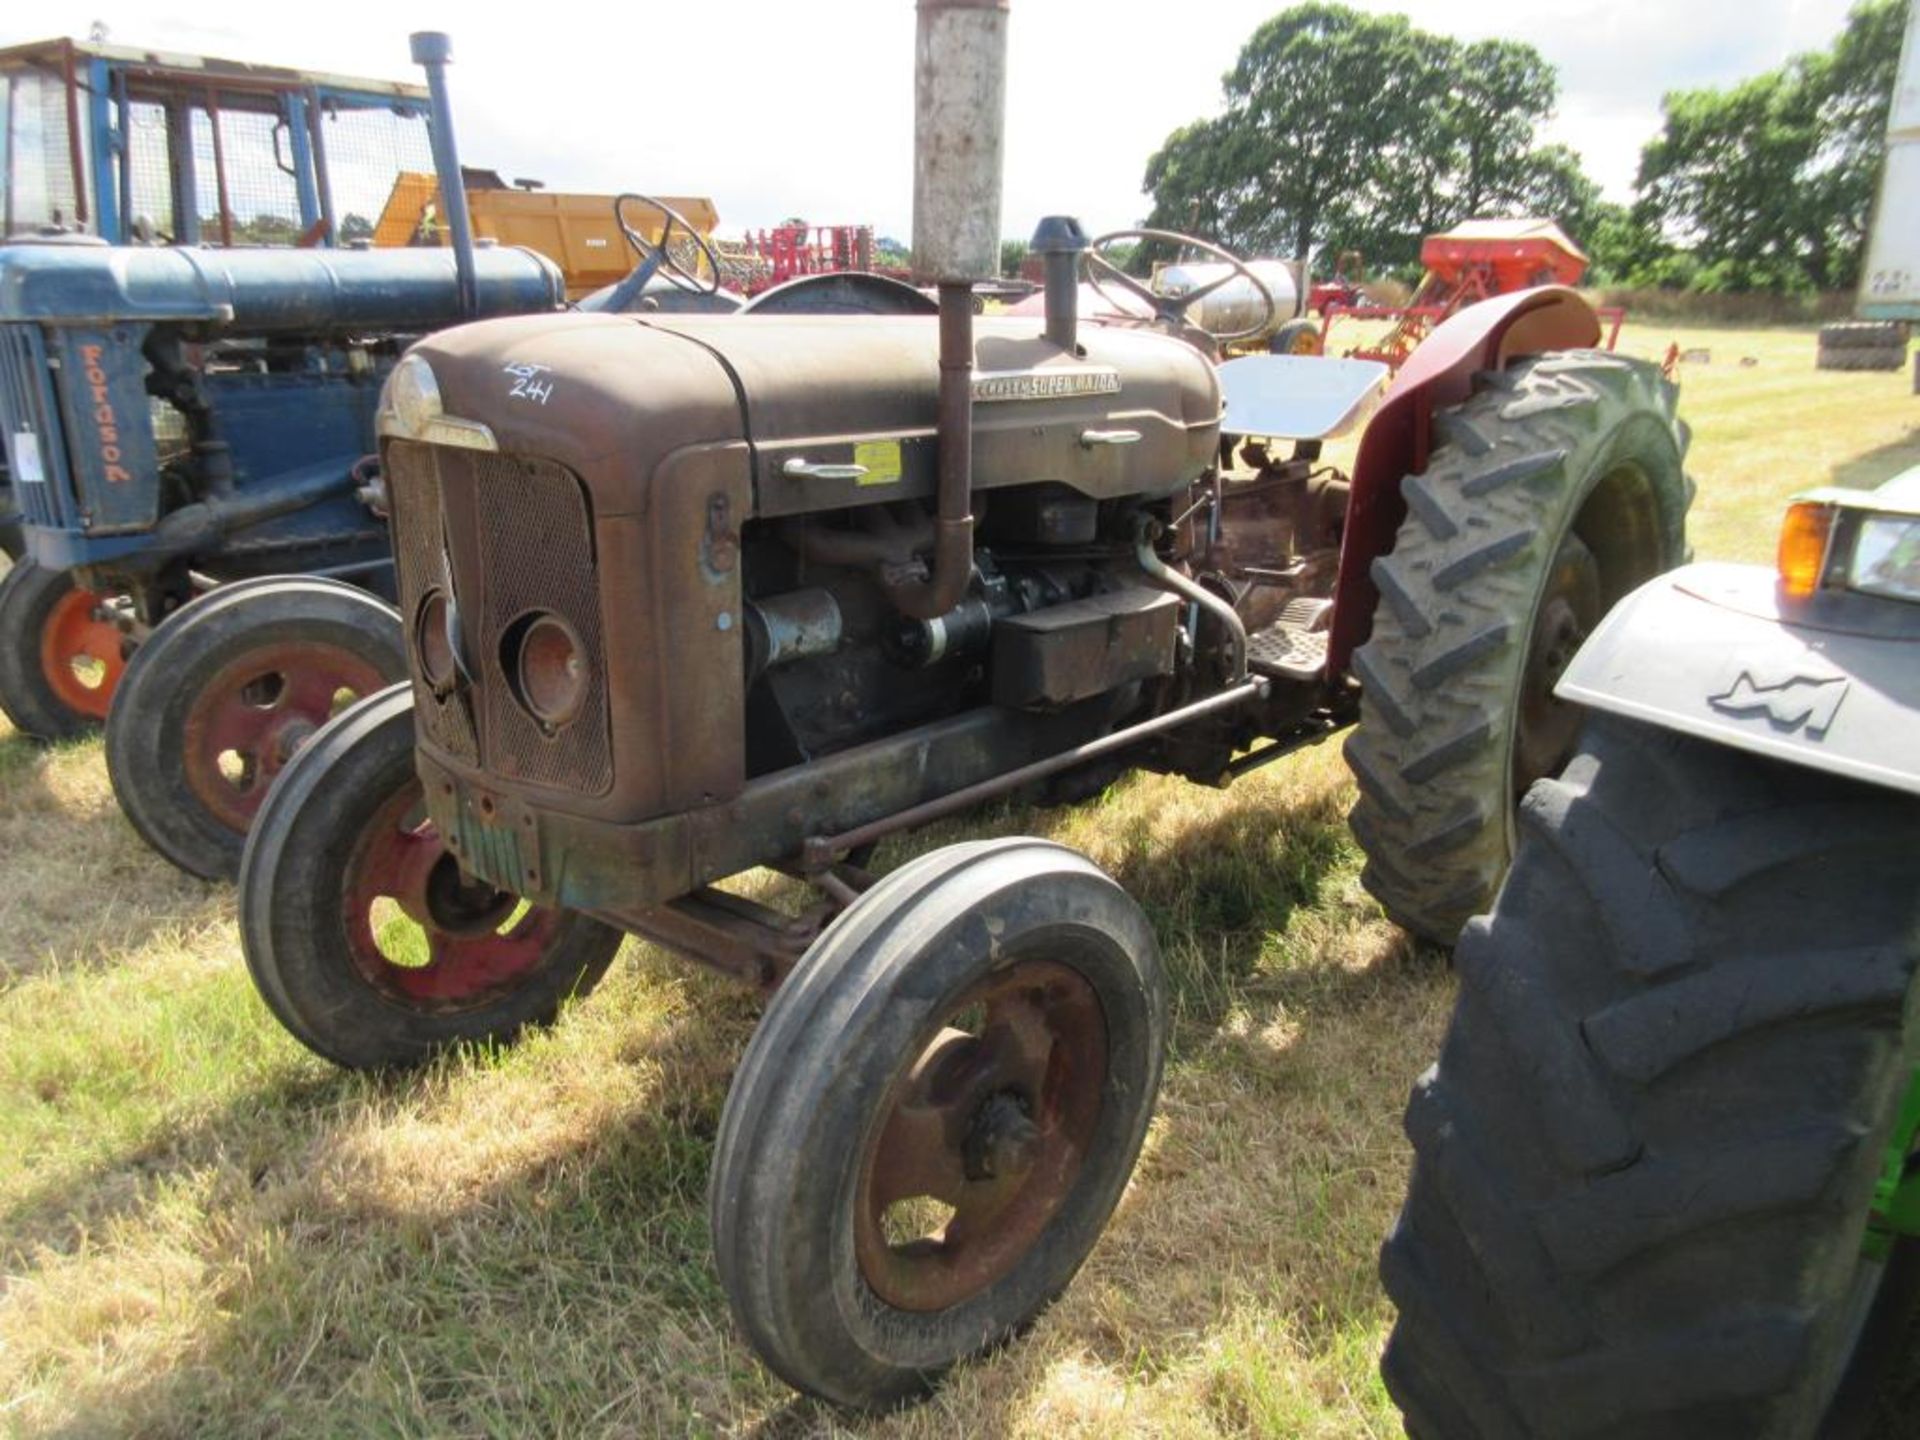 FORDSON Super Major 4cylinder diesel TRACTOR Fitted with side belt pulley, rear linkage and new rear